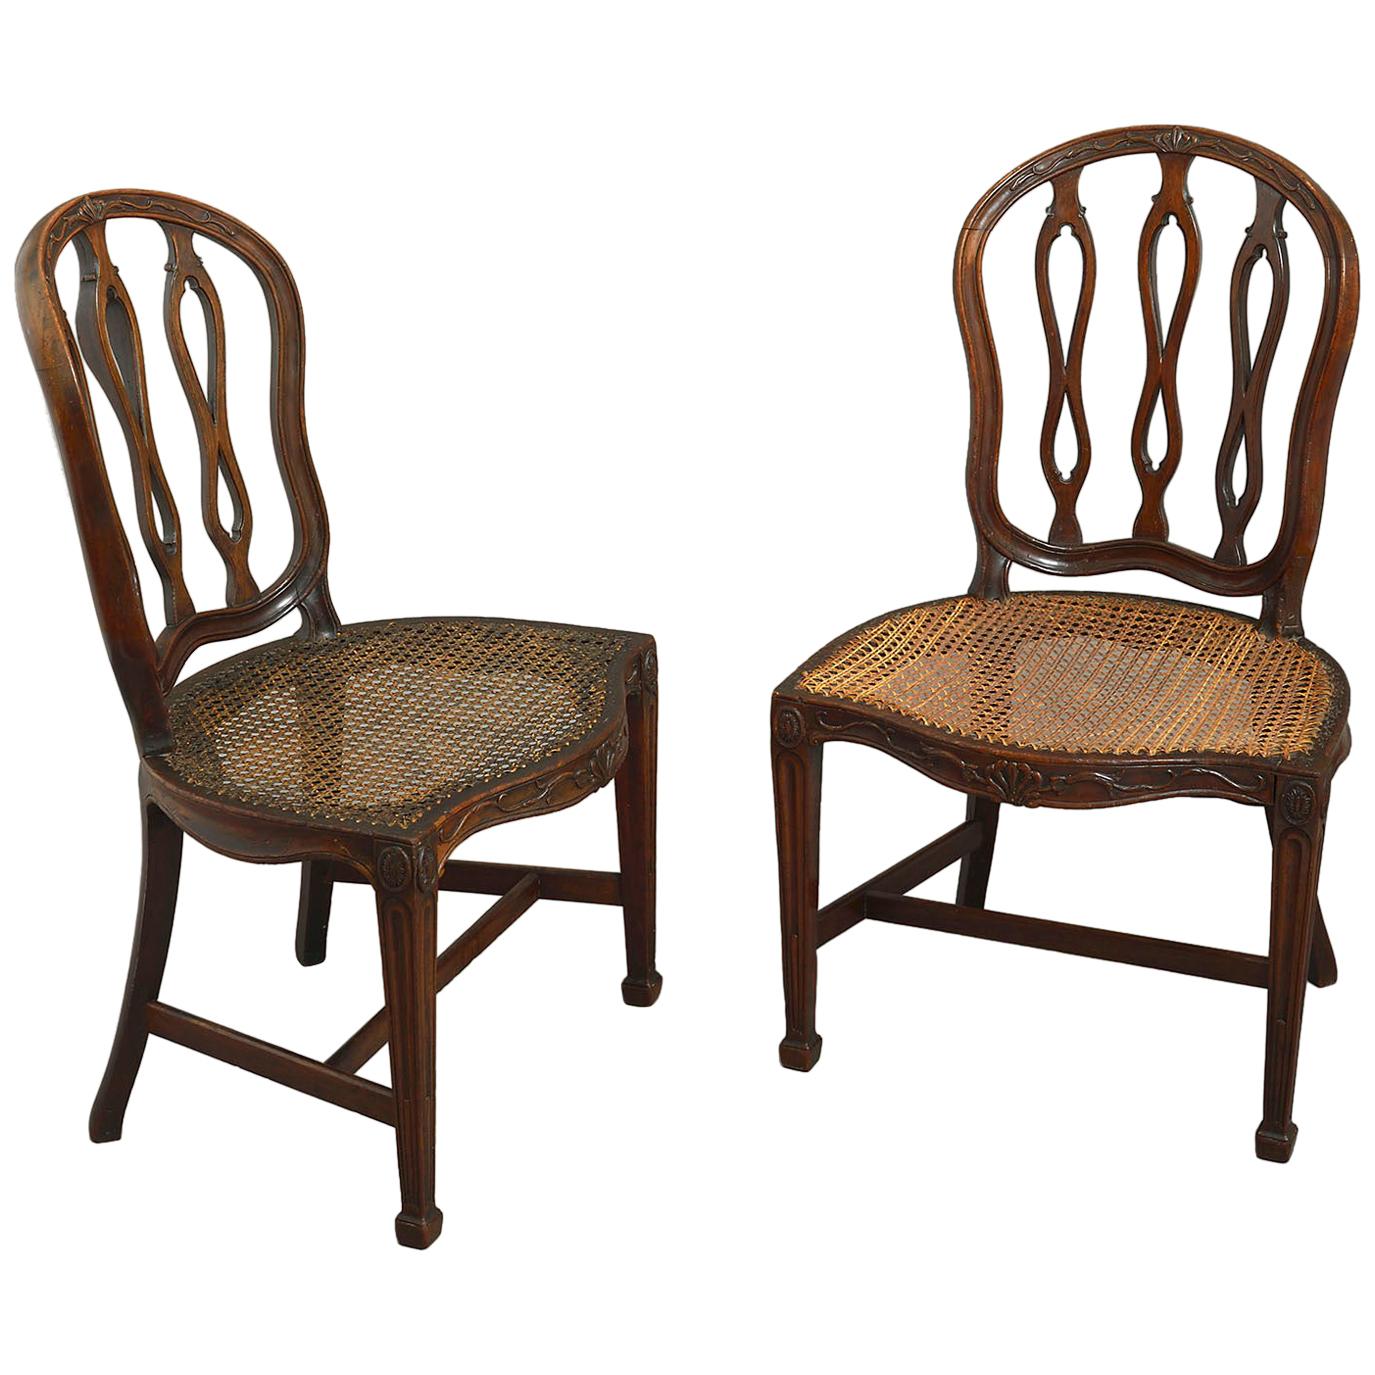 18th Century Pair of George III Mahogany Chairs in the Manner of James Wyatt